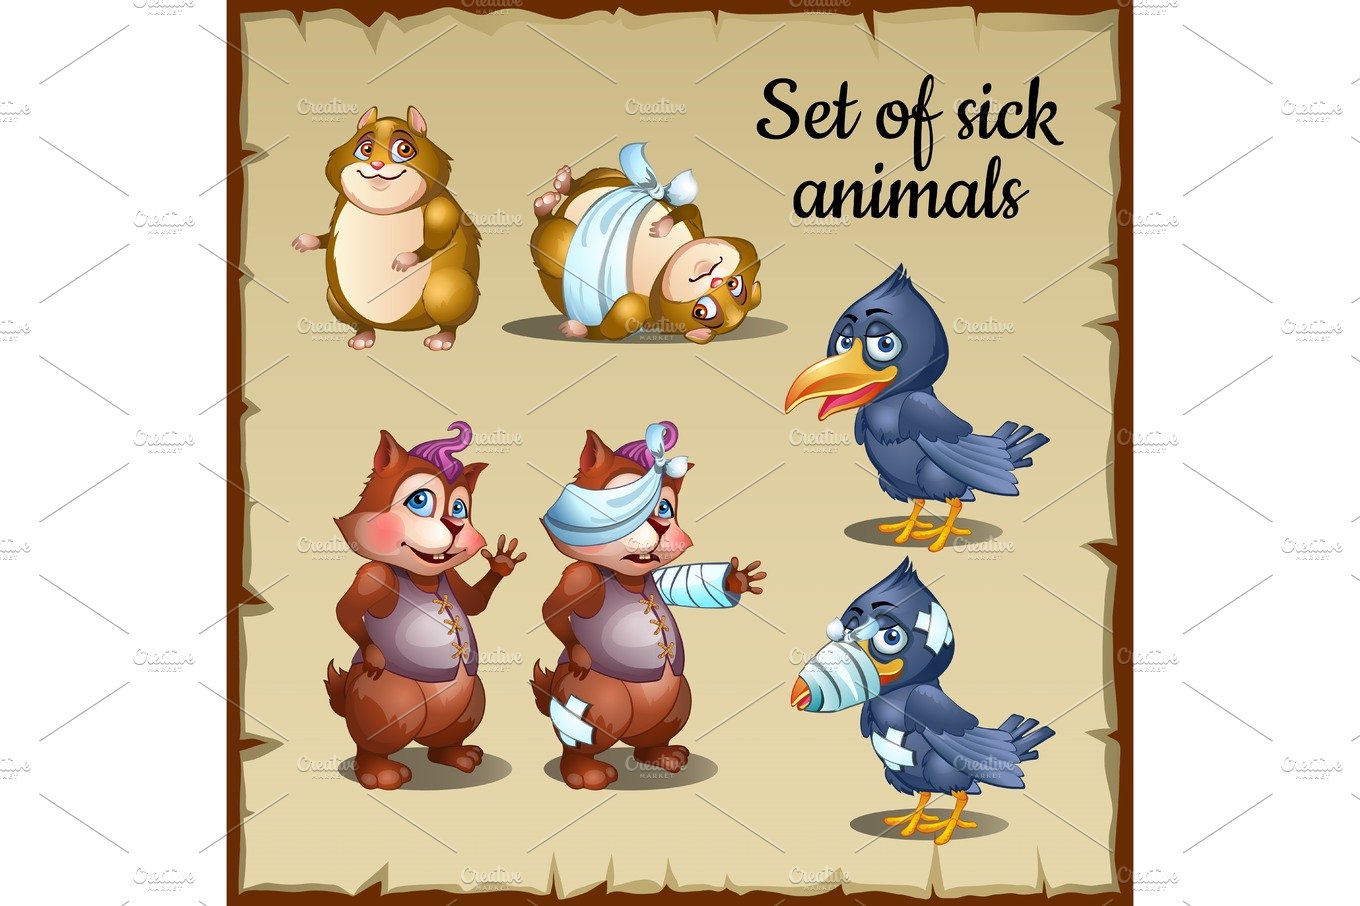 Sick and healthy animals, raven, beaver, hamster cover image.